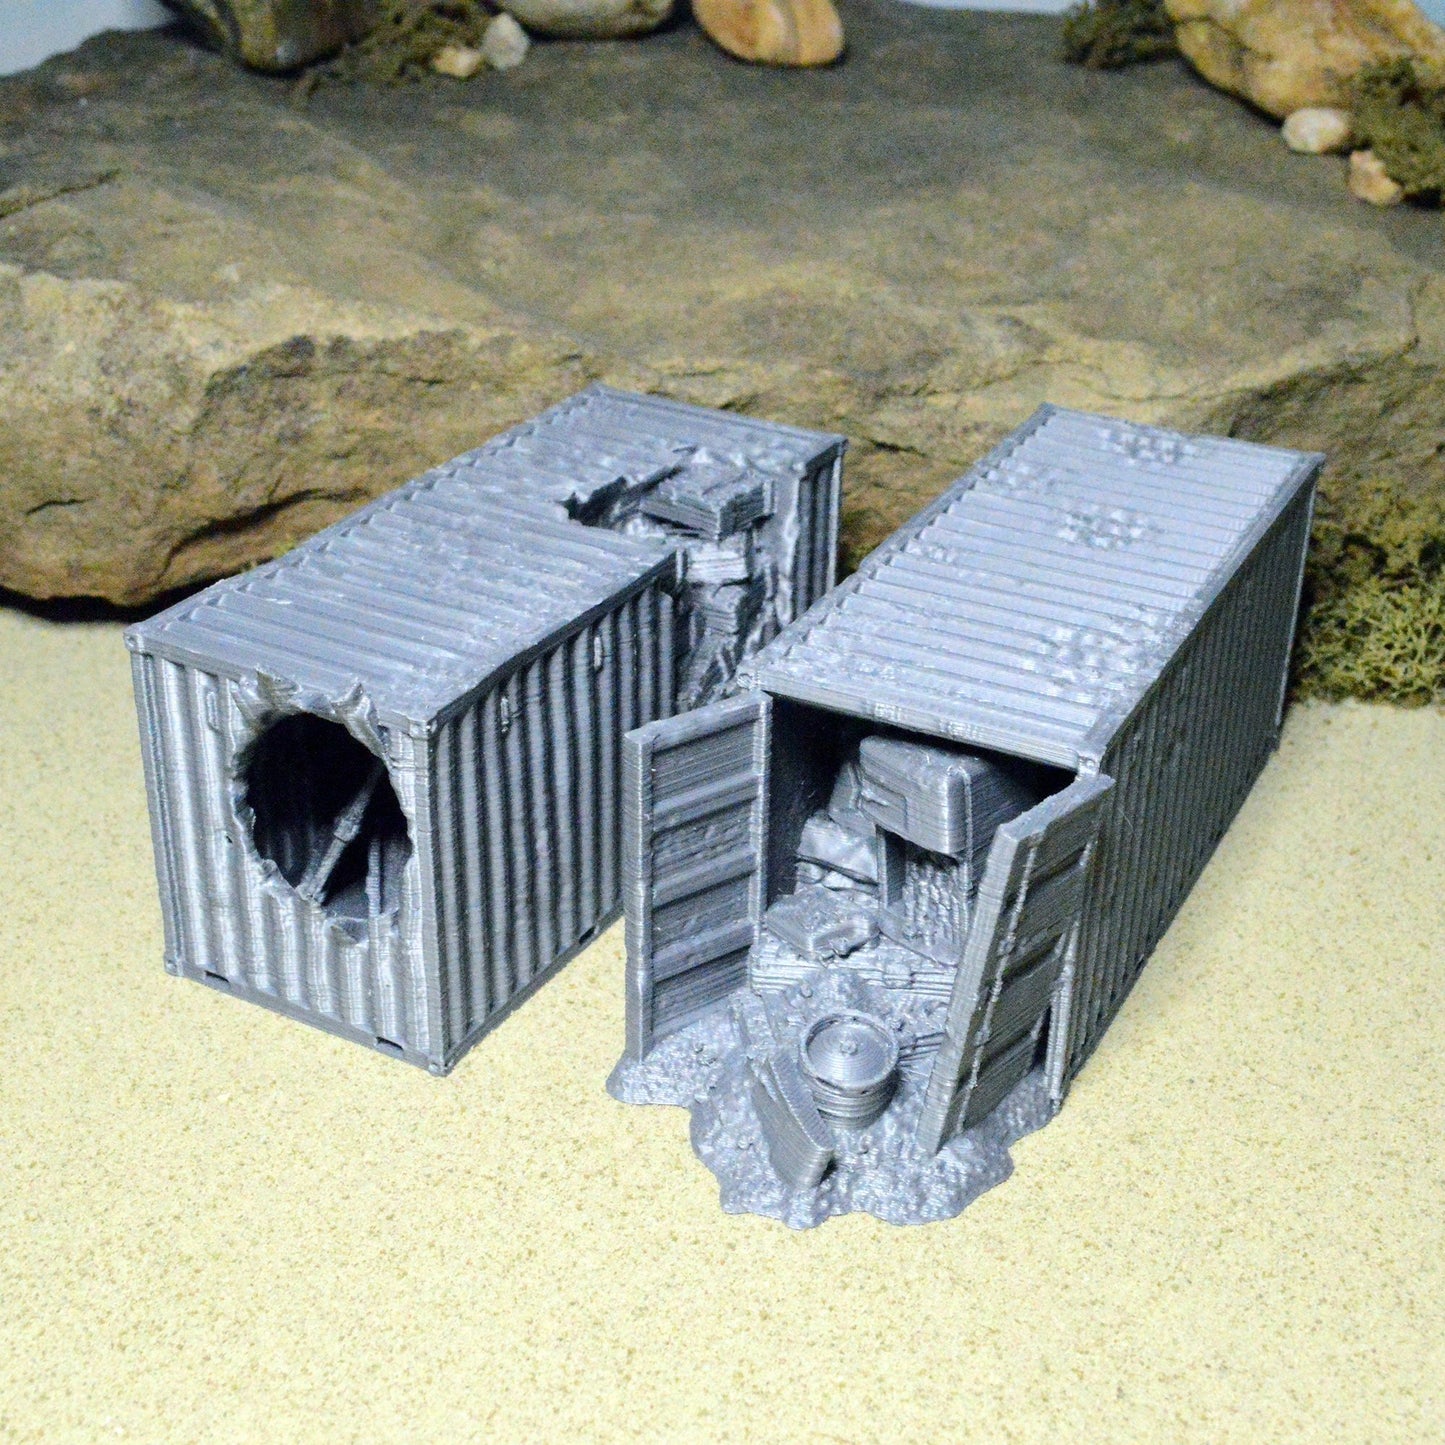 Scrapyard Miniature Shipping Containers 15mm 20mm 28mm 32mm for Gaslands Terrain, Urban Fallout Wasteland Post-Apocalyptic